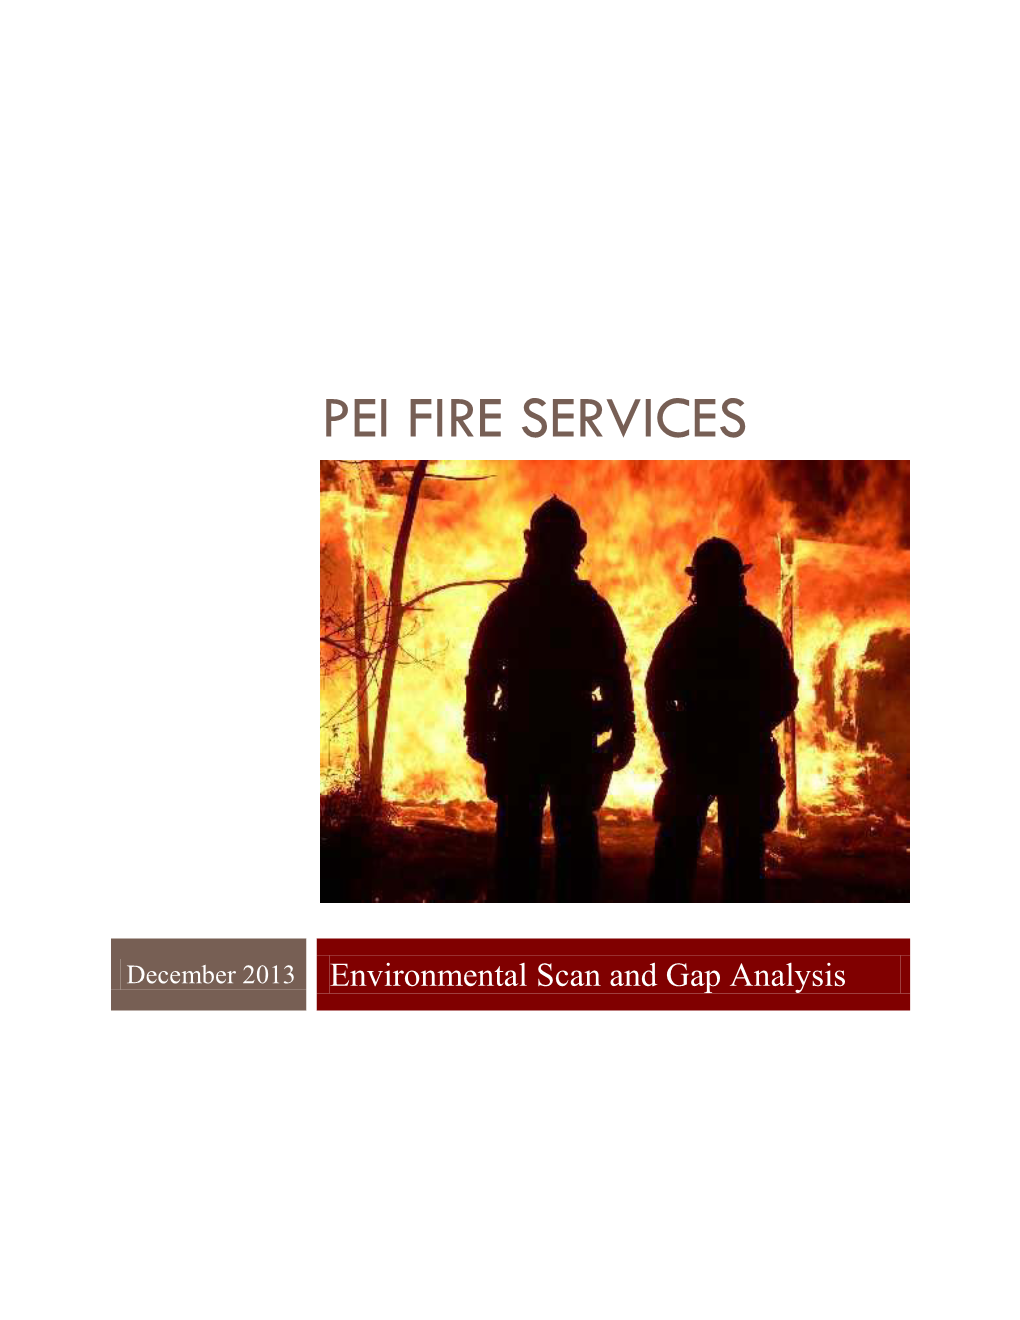 PEI FIRE SERVICES Environmental Scan and Gap Analysis